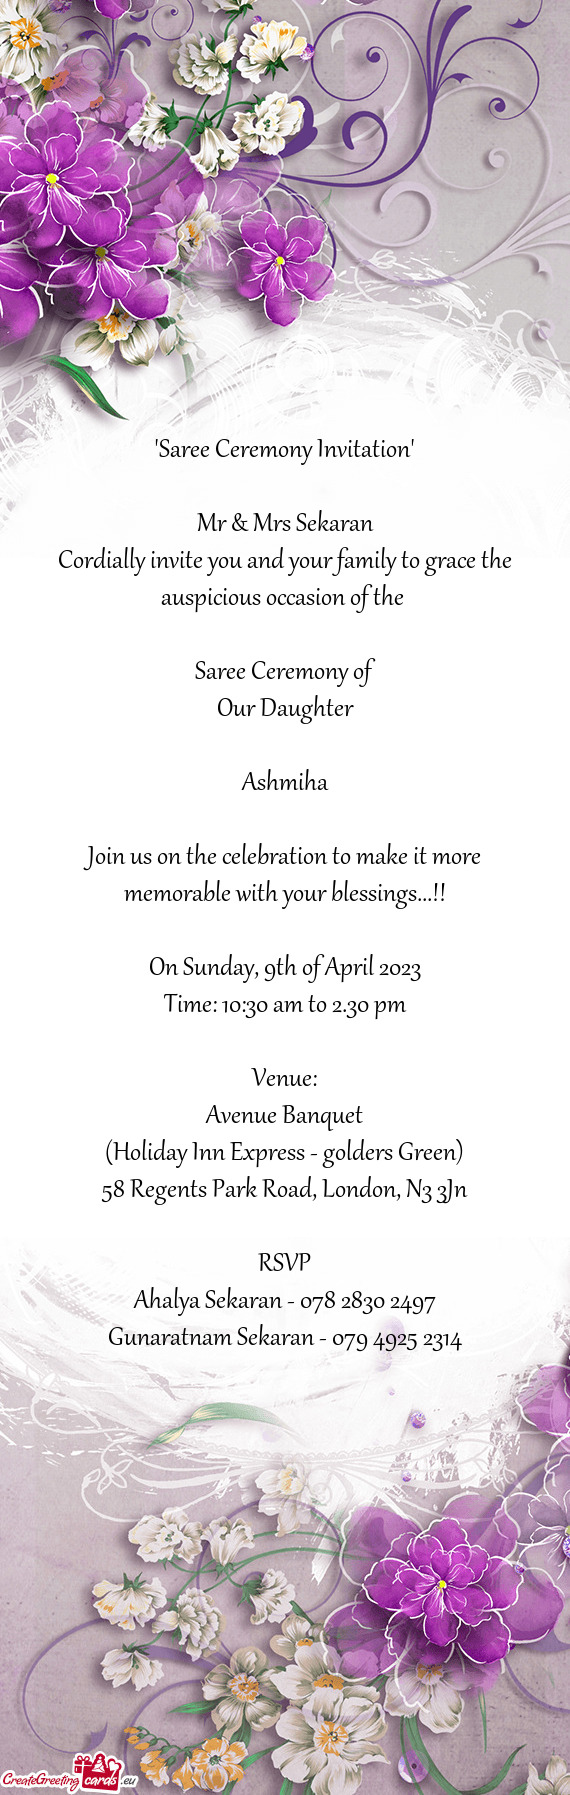 Cordially invite you and your family to grace the auspicious occasion of the